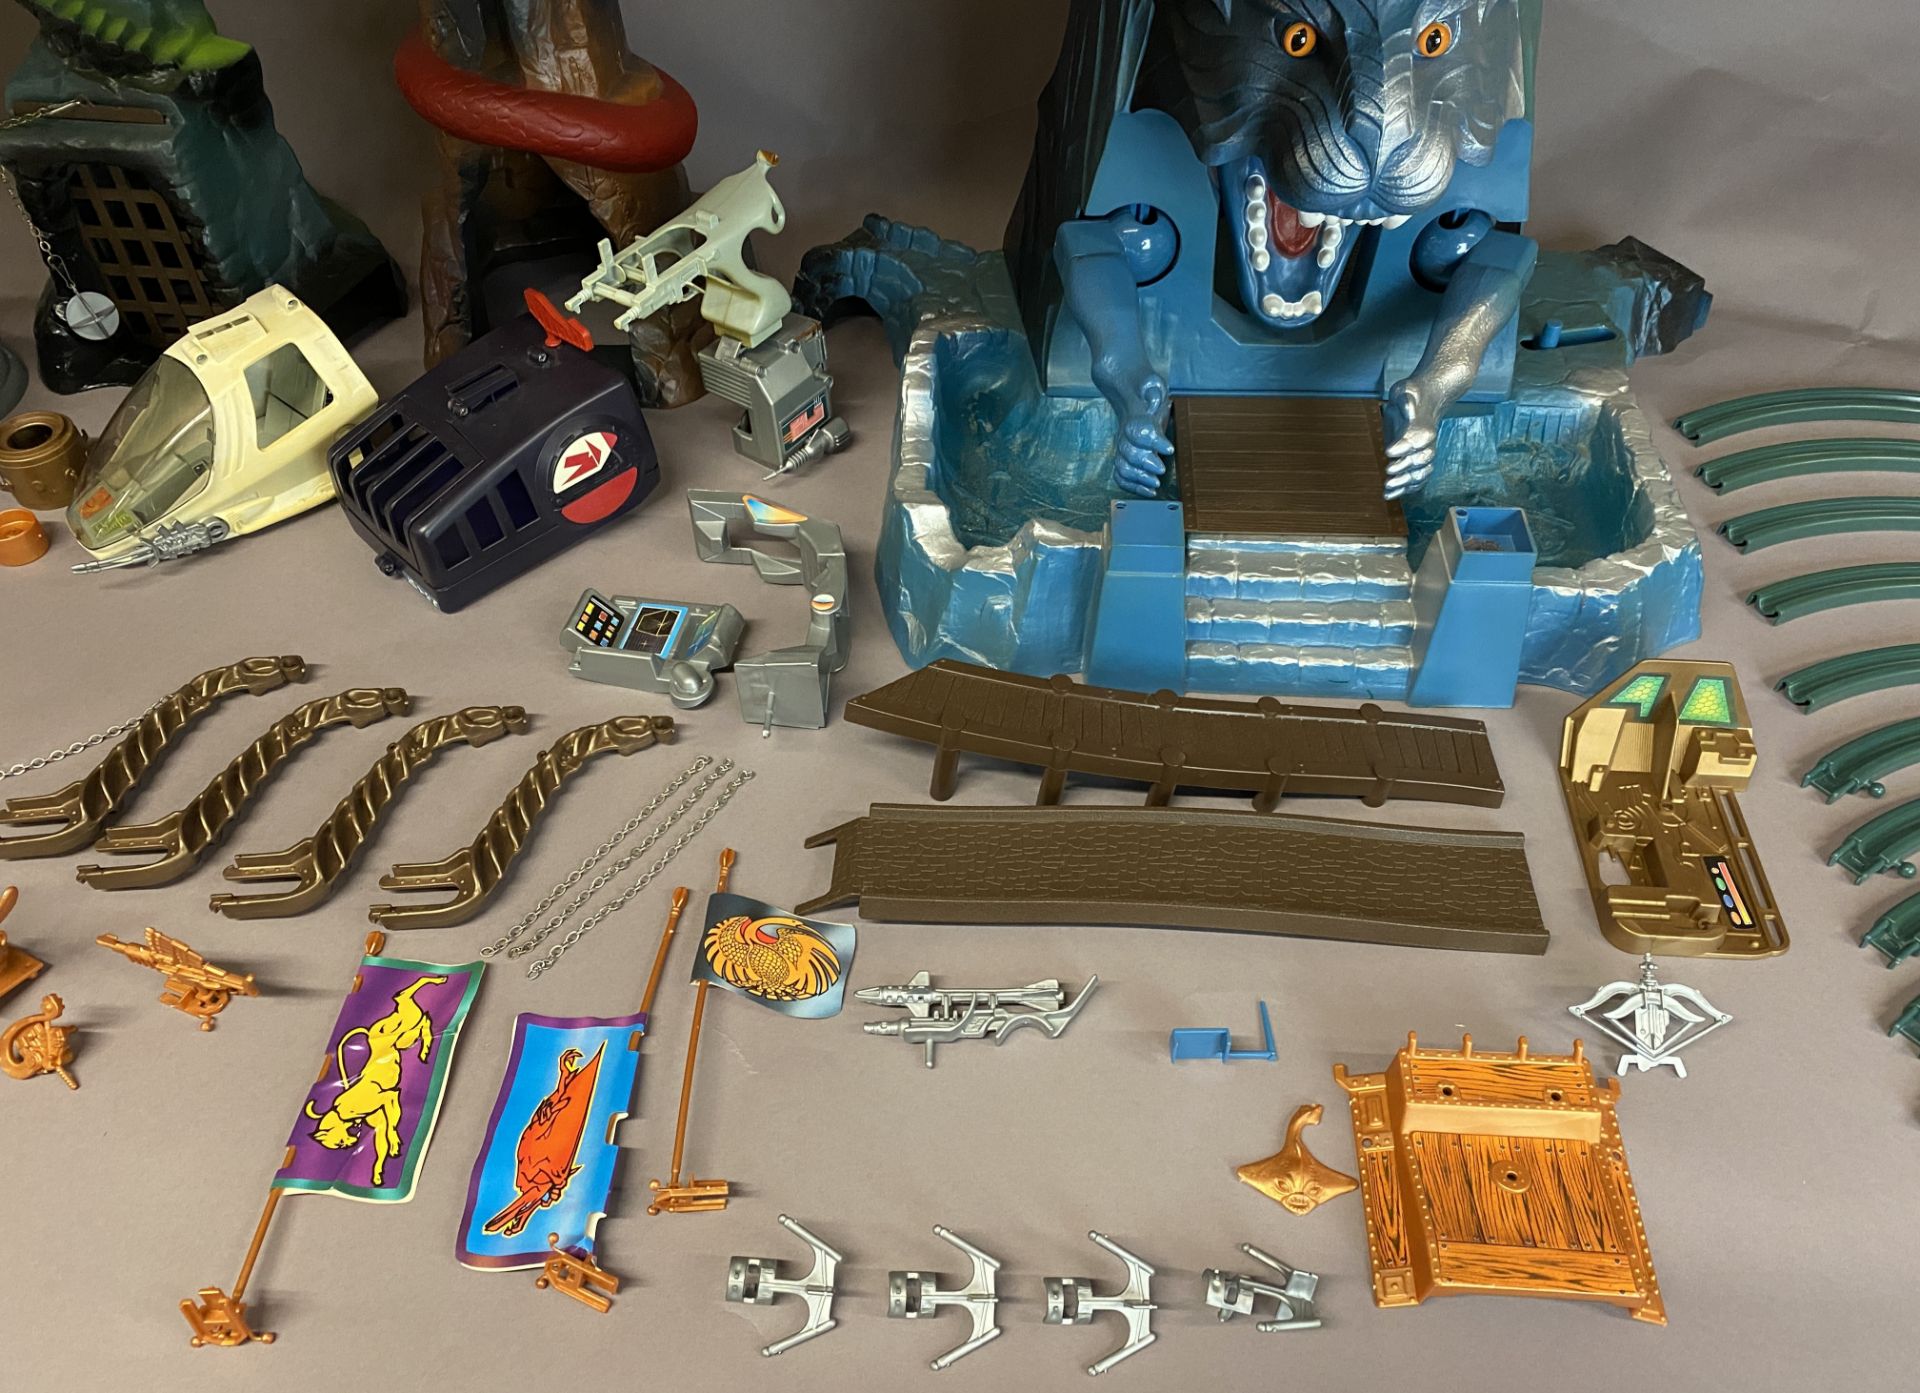 ETERNIA - Vintage Masters of the Universe Playset and Original Box (MOTU) - Appears to be complete - Image 75 of 125